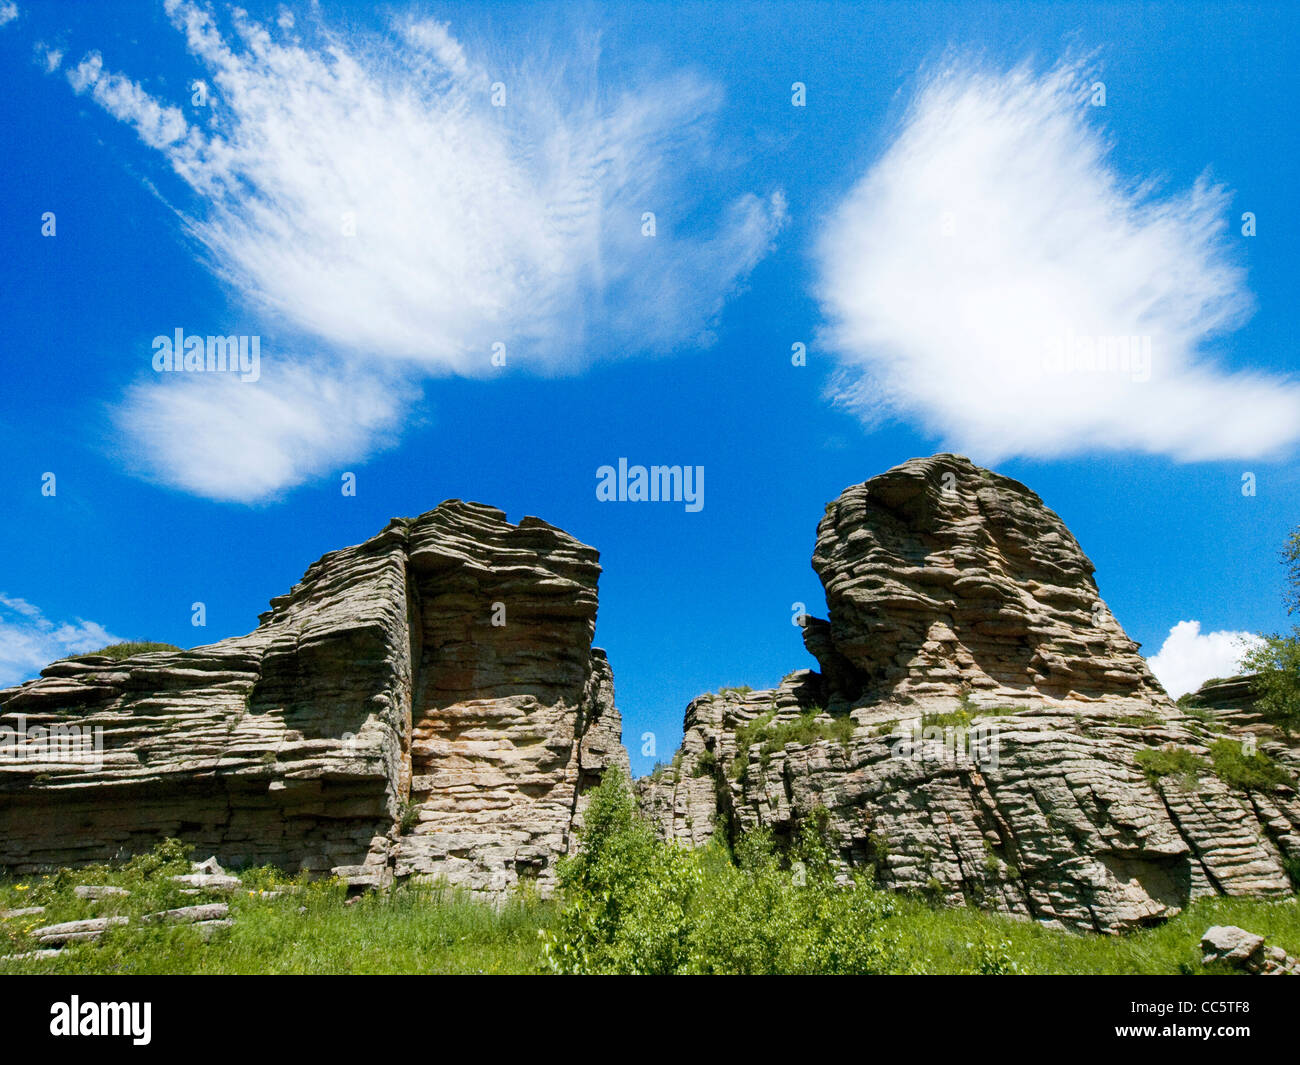 Eroded rocky formation, Arshihaty Granite Forest, Hexigten Global Geopark, Chifeng, Inner Mongolia, China Stock Photo